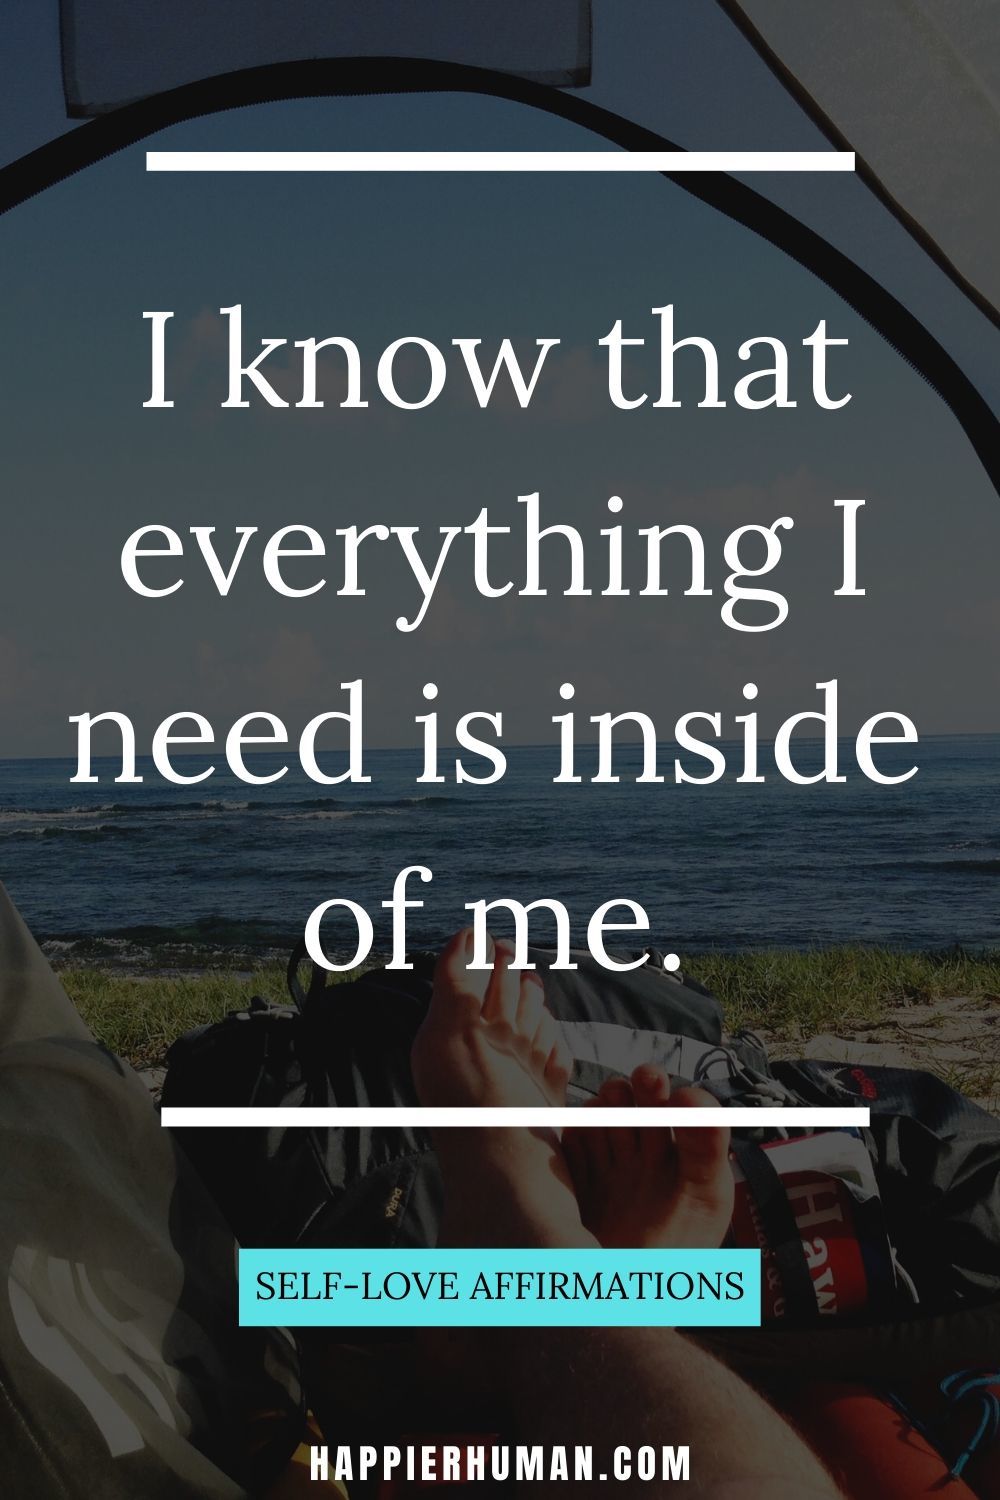 Self Love Affirmations - “I know that everything I need is inside of me.” | affirmations for self love and confidence | self-love affirmations for body talk | affirmation i am love #affirmation #selfloveaffirmations #loveaffirmations